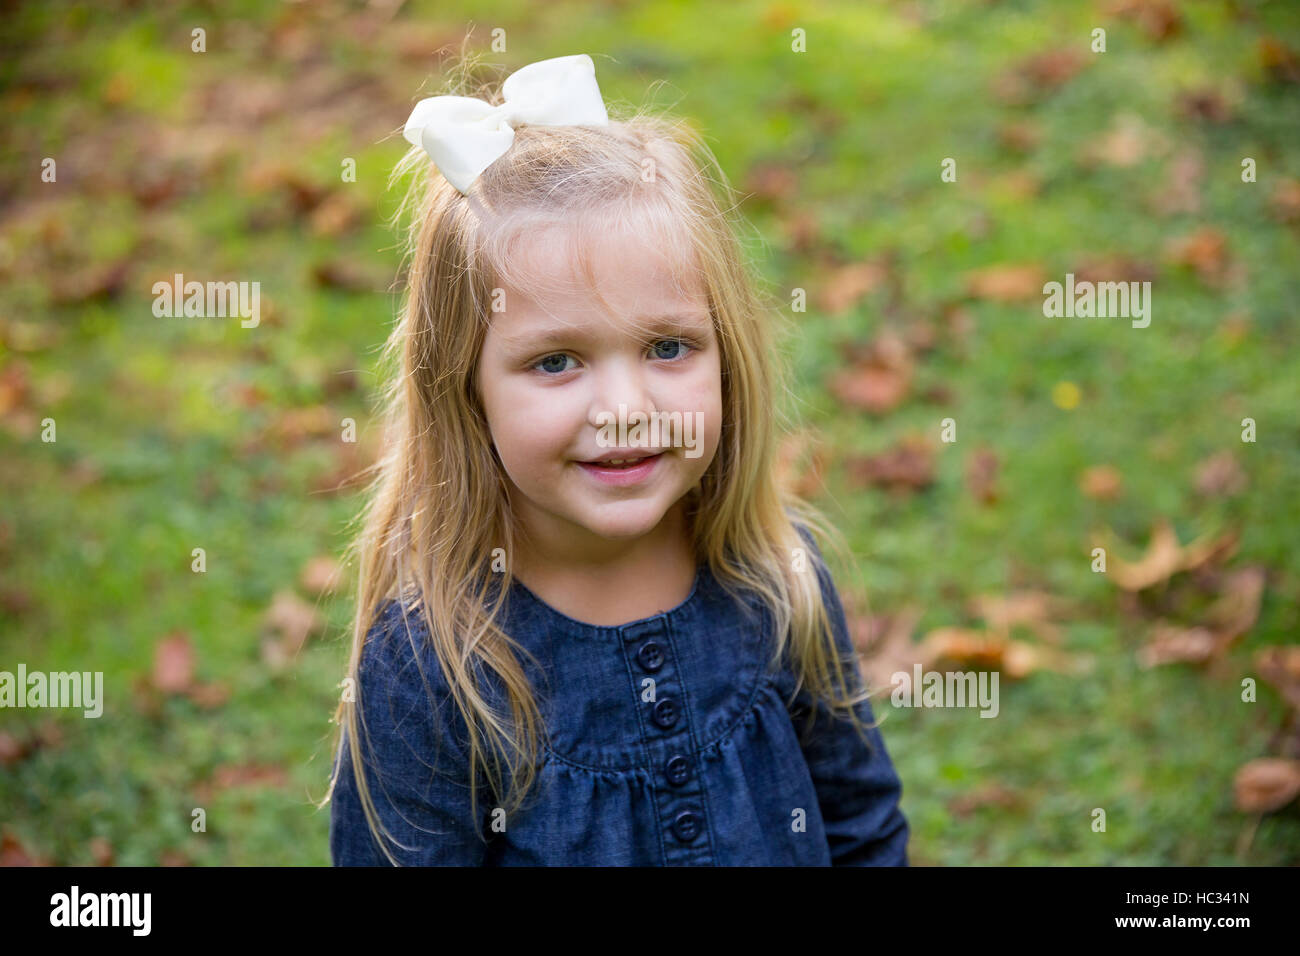 Candid lifestyle portrait of a young girl at a park. Stock Photo